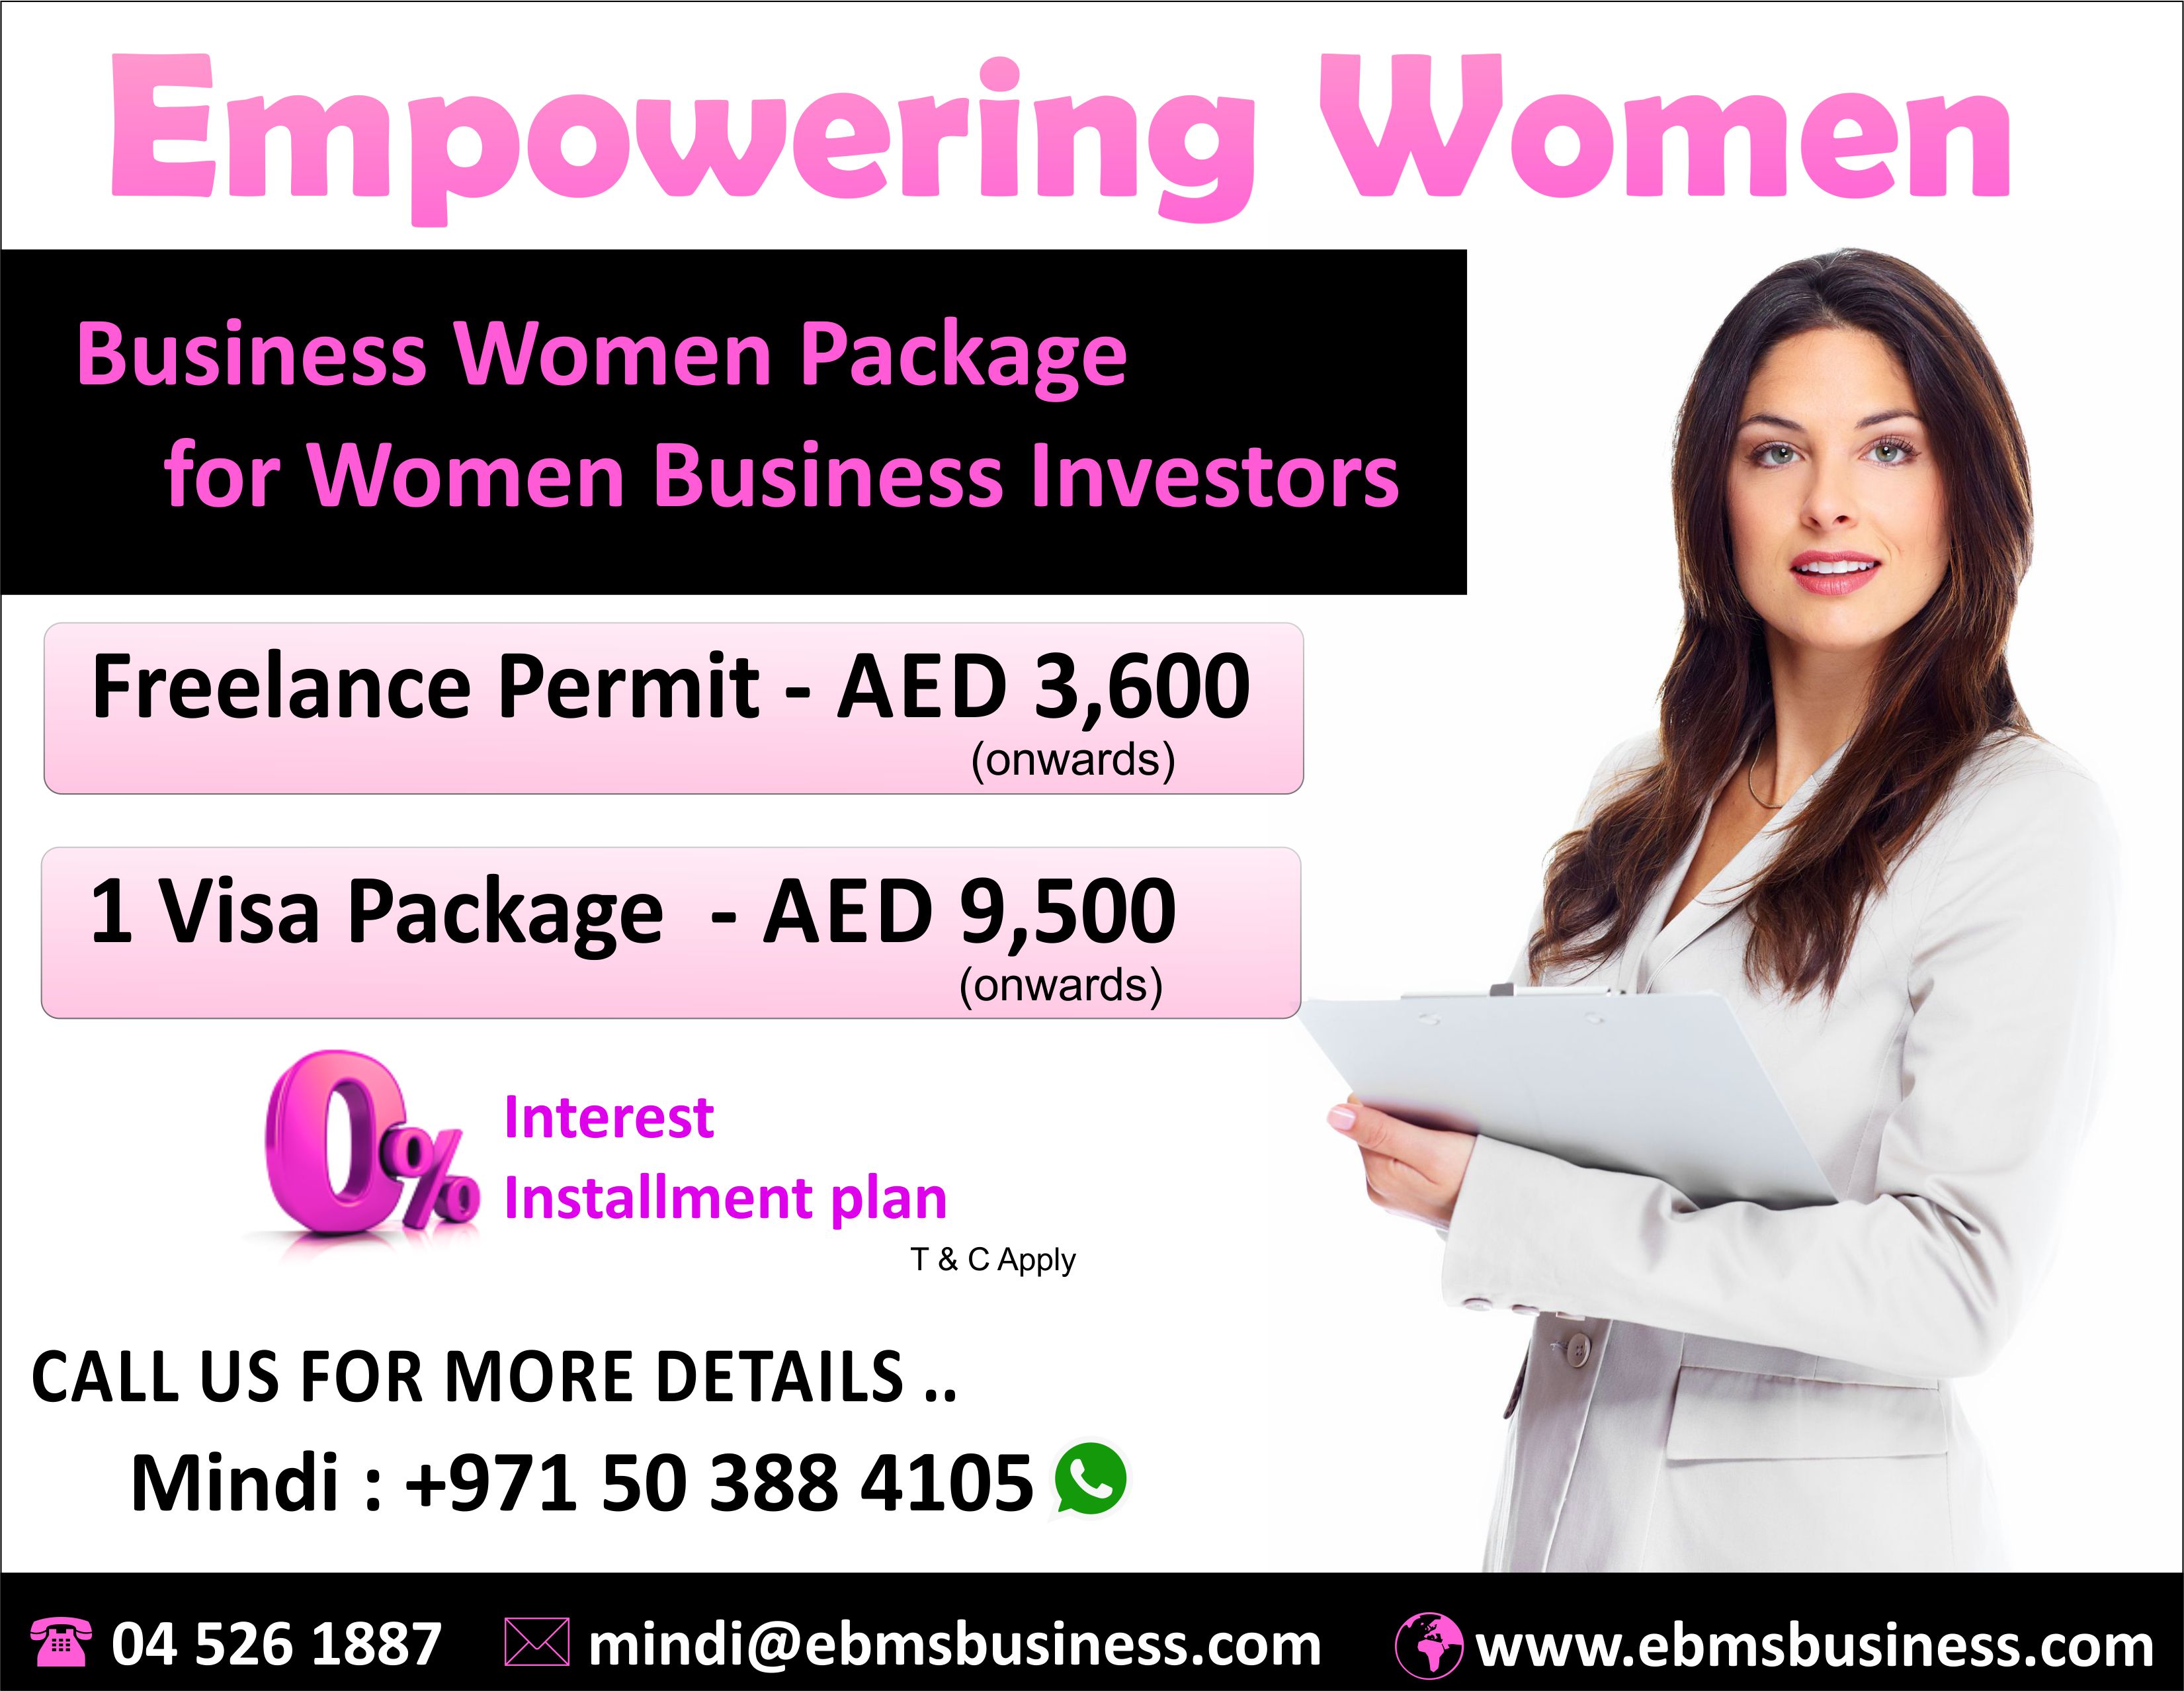 Business women package for women business Investors